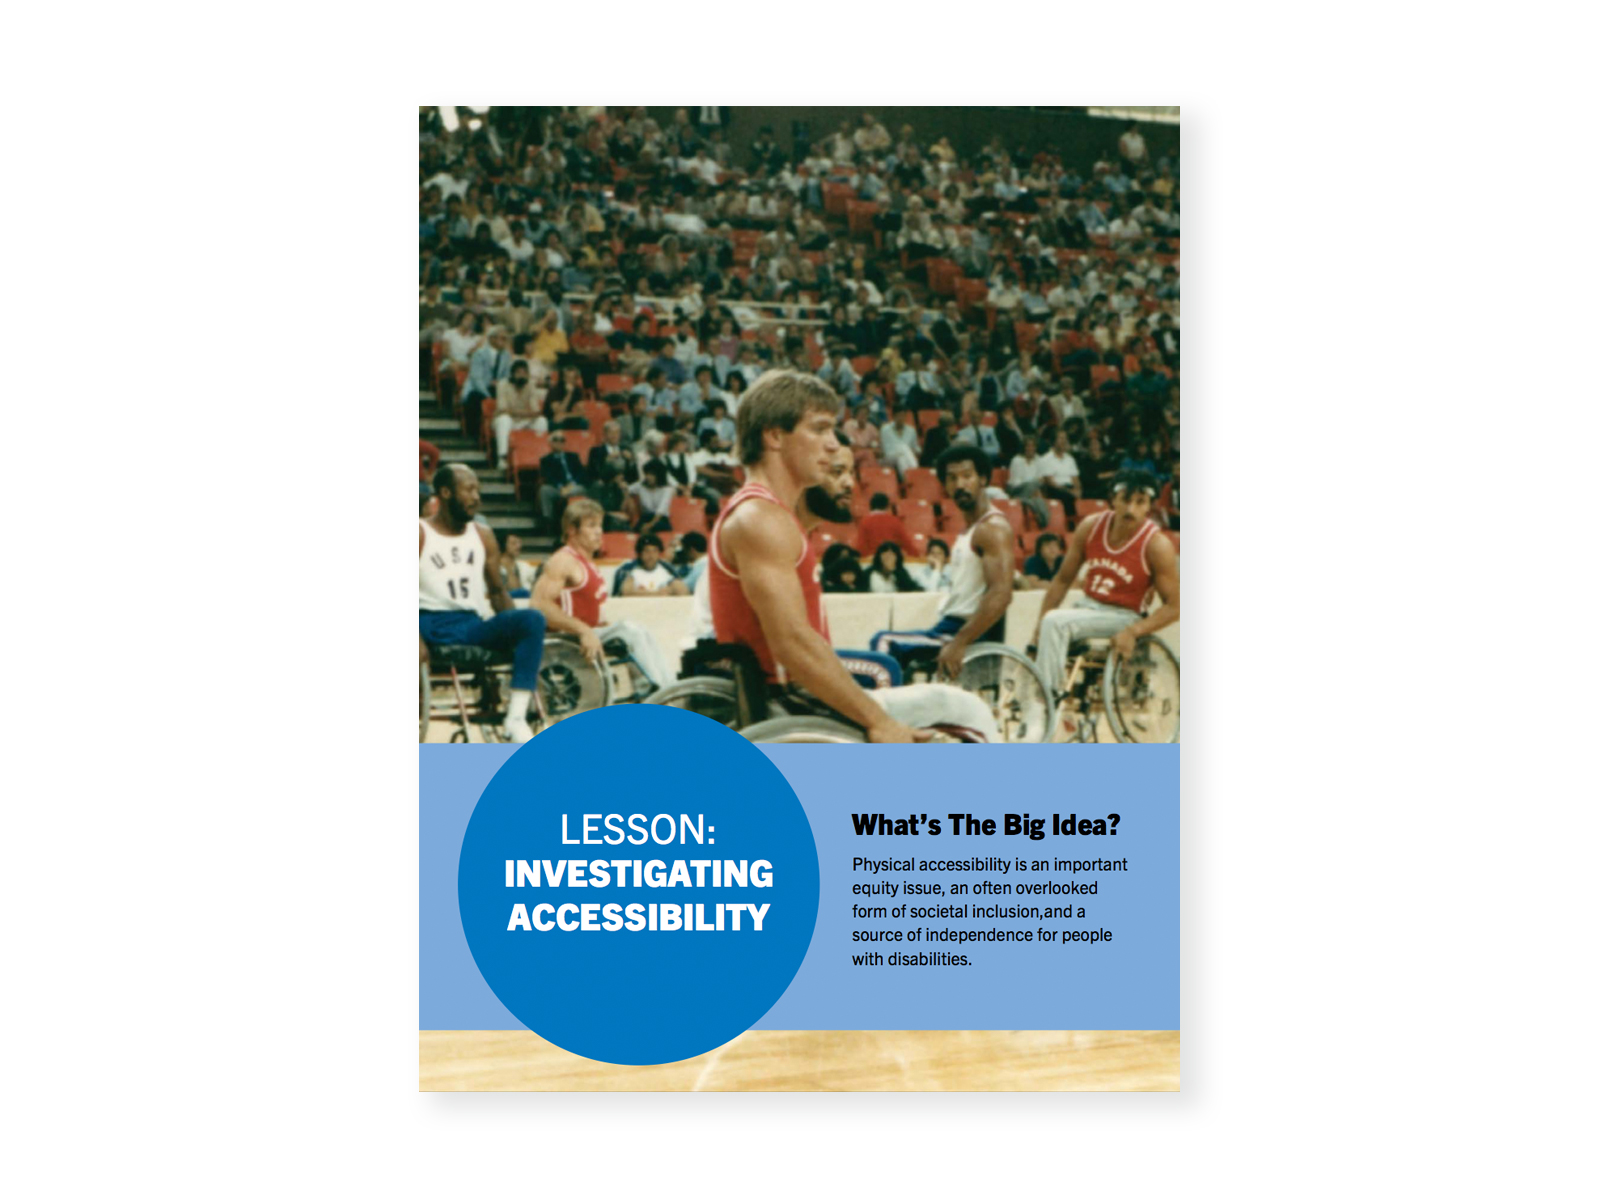 Rick Hansen as a young adult and his wheelchair basketball teammates during a game. The stands are filled with spectators. Cover for "Investigating Accessibility" lesson.